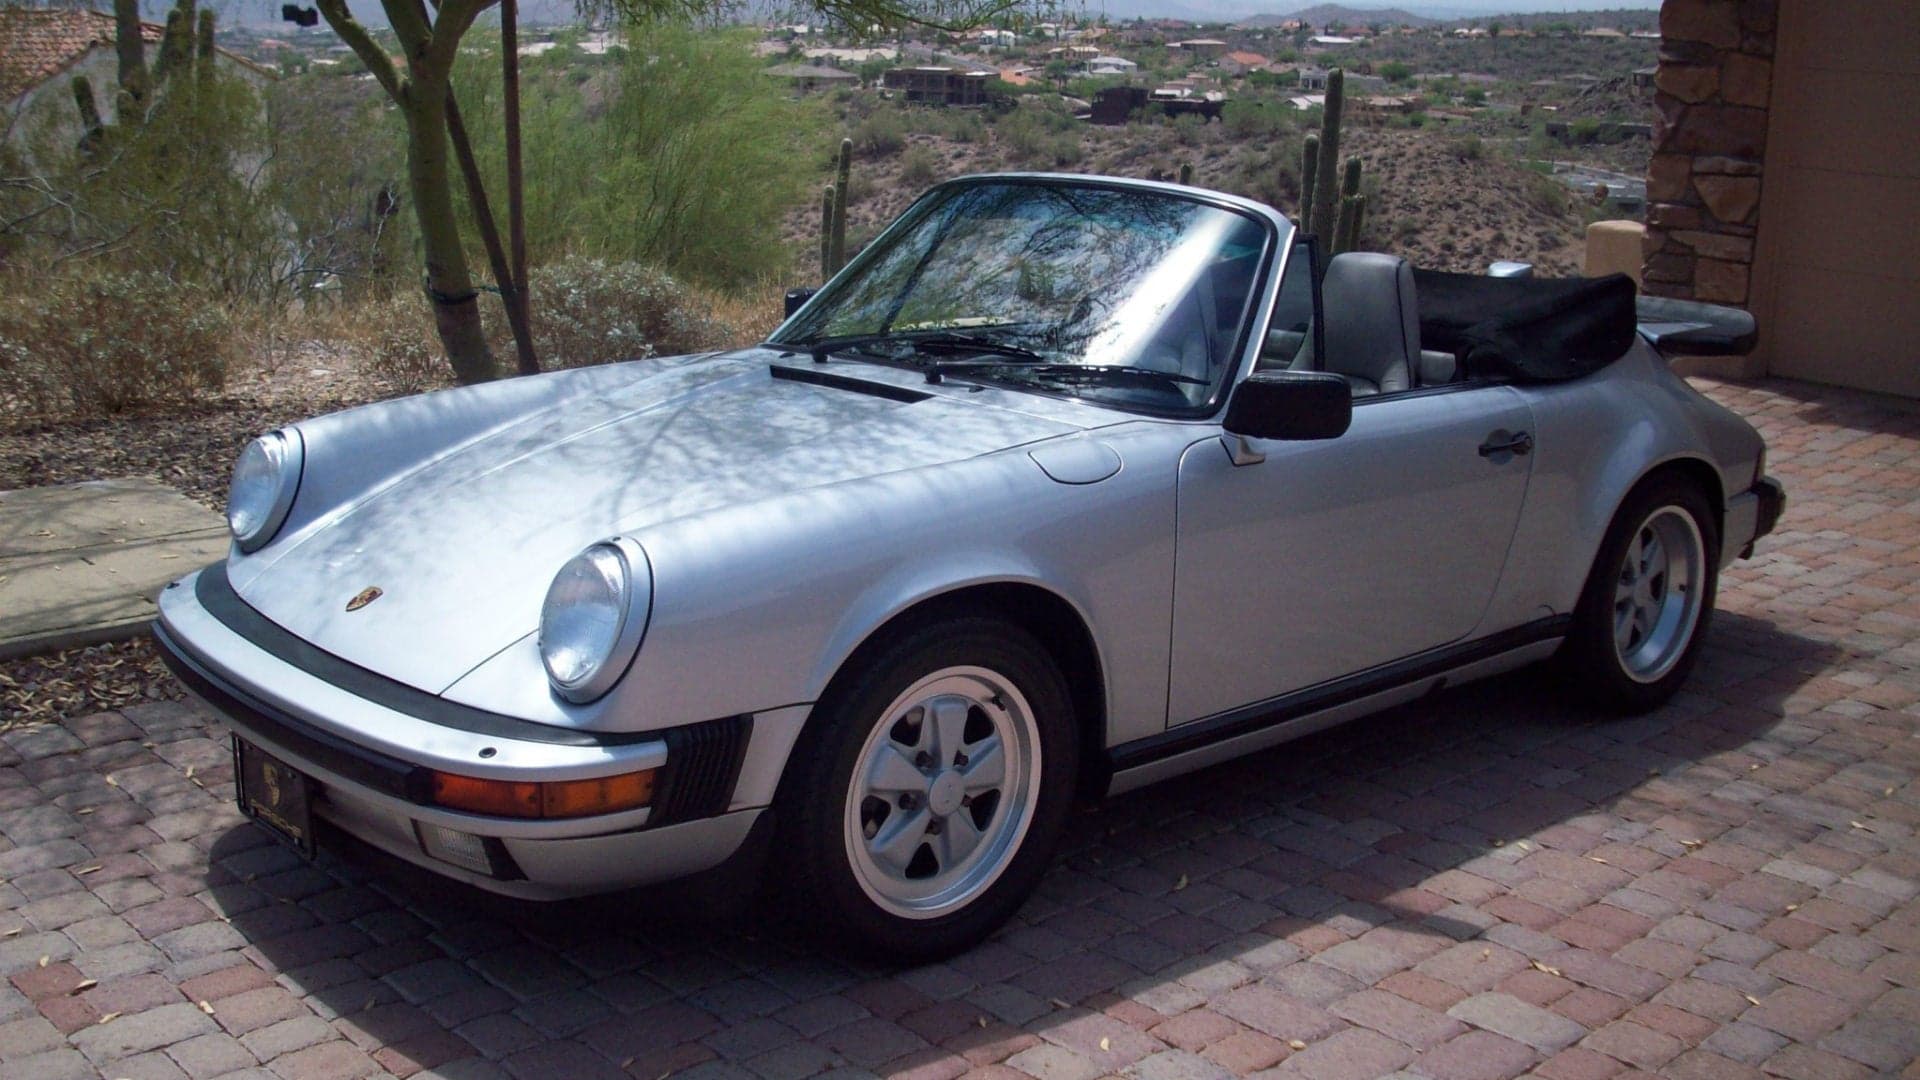 This 1989 Porsche 911 Carrera Cabriolet 25th Anniversary Edition Is One of 200